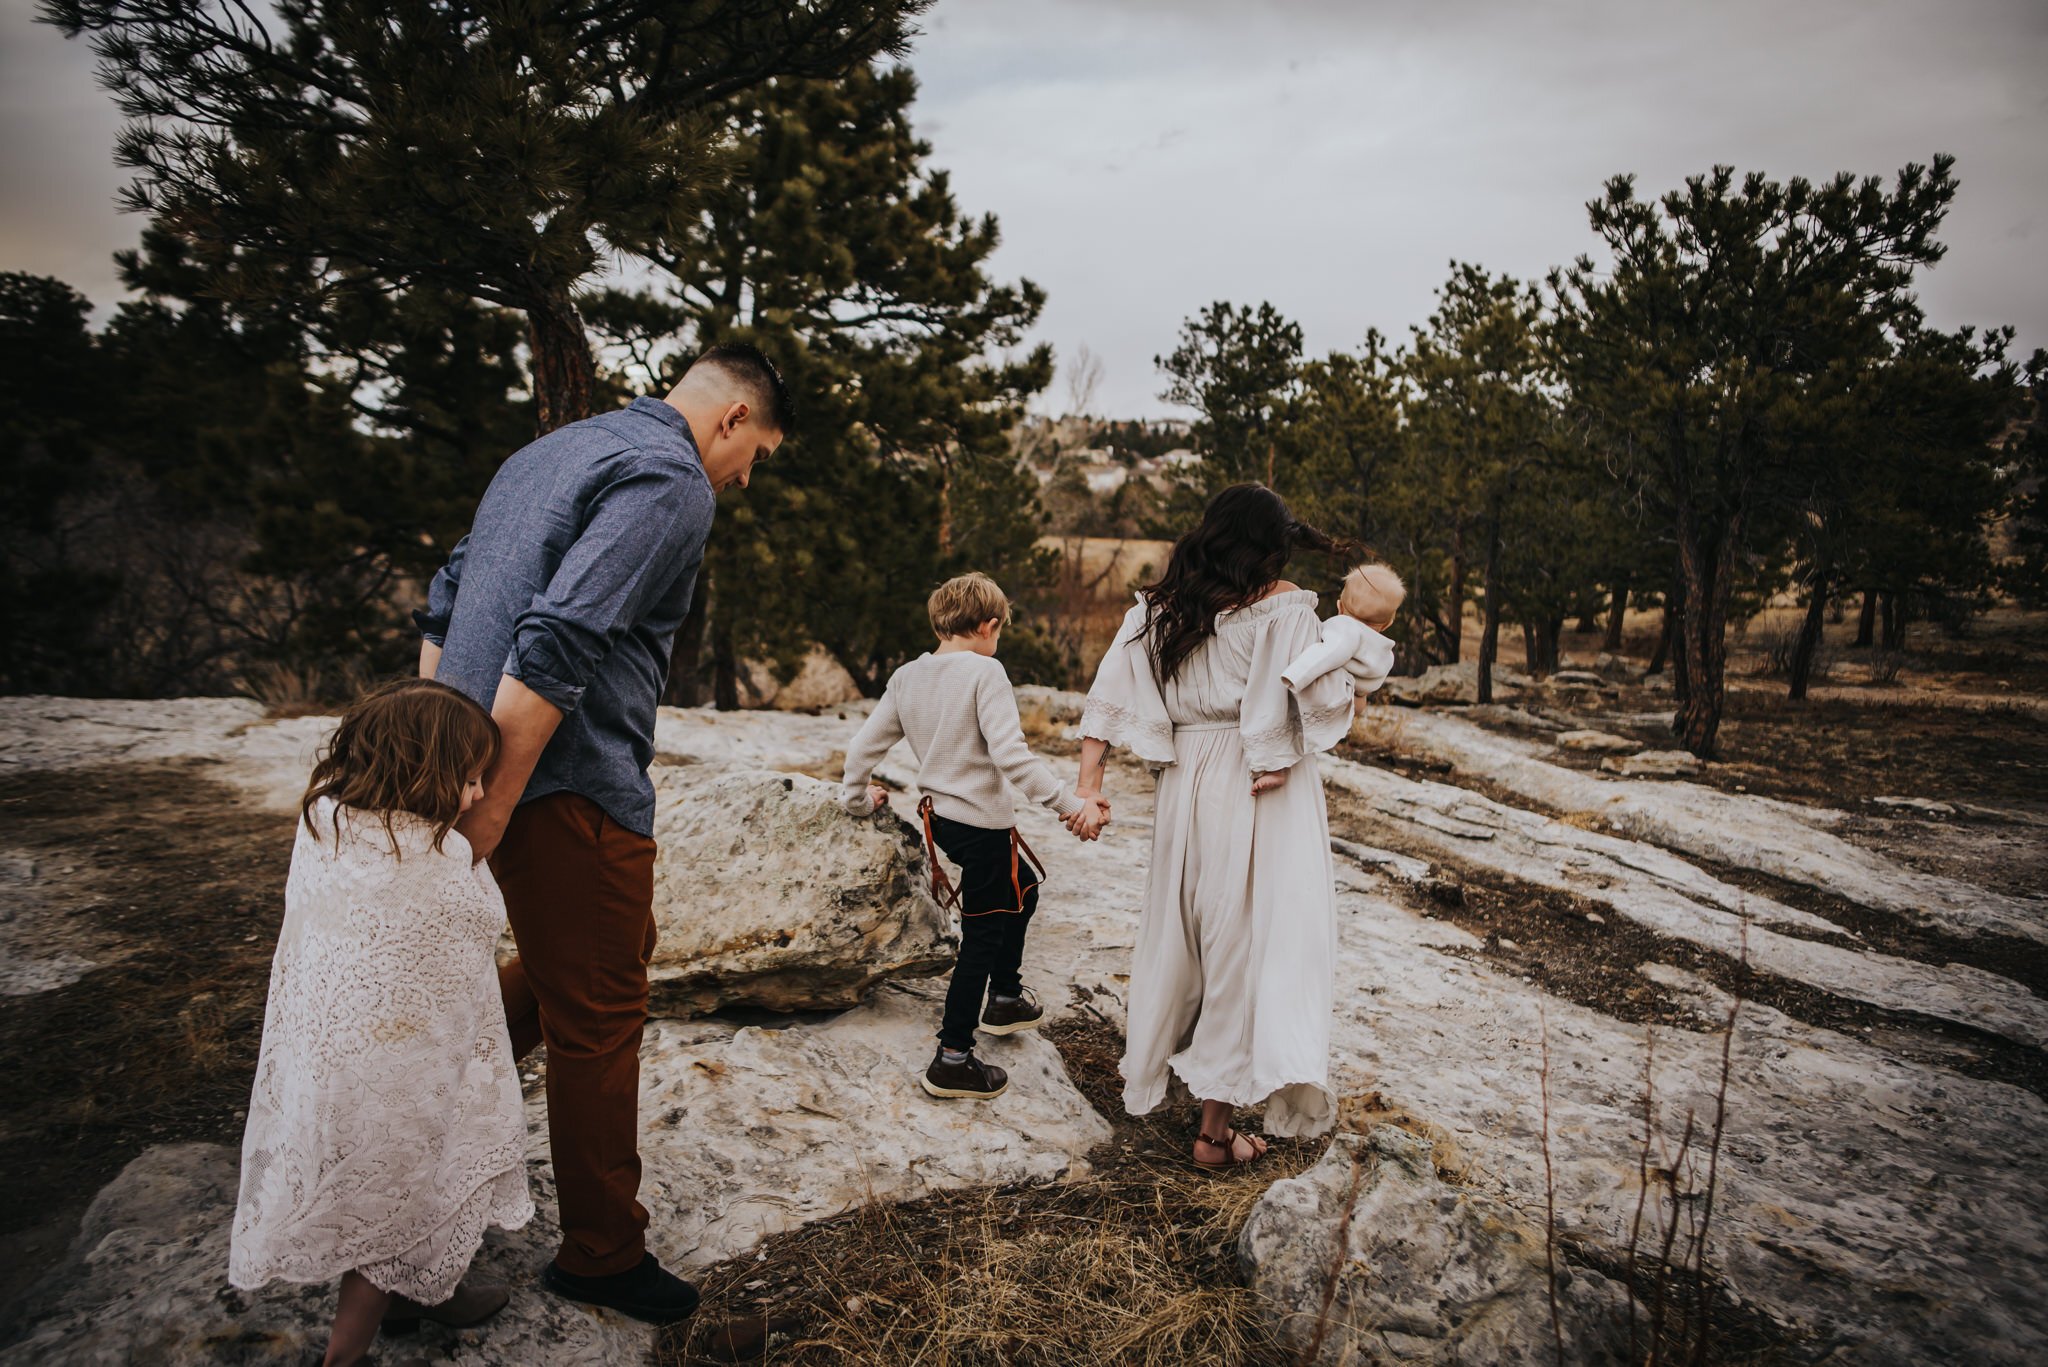 Miller+Family+Session+Mentorship+Colorado+Springs+Colorado+Sunset+Ute+Valley+Park+Mountains+Fields+Mom+Dad+Son+Daughter+Baby+Wild+Prairie+Photography-25-2020.jpeg